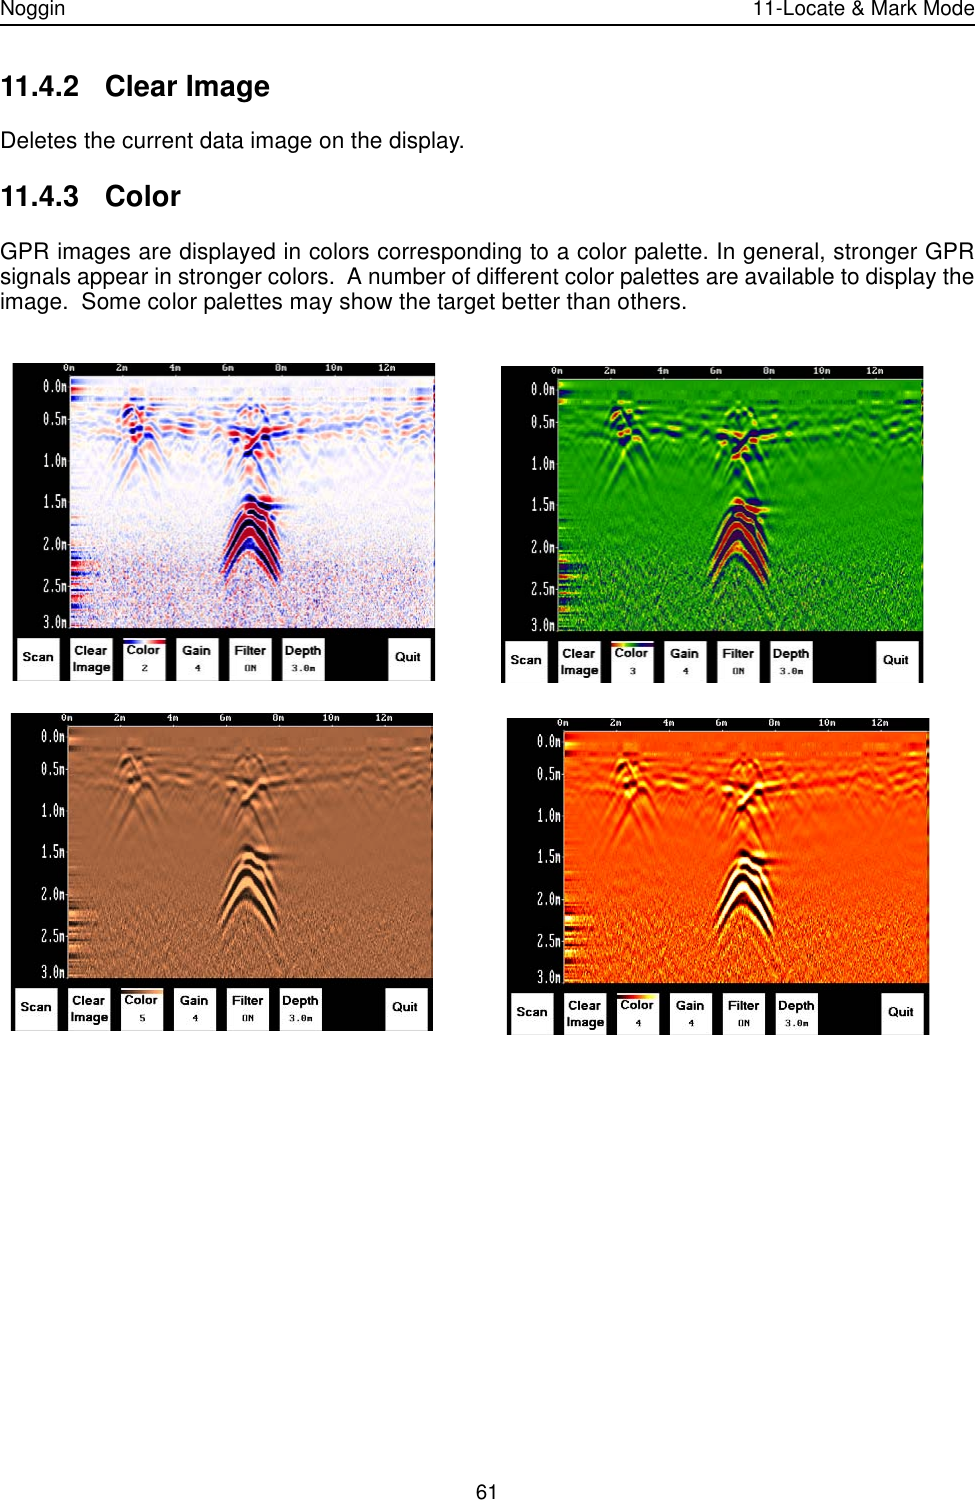 Noggin 11-Locate &amp; Mark Mode6111.4.2 Clear ImageDeletes the current data image on the display.11.4.3 ColorGPR images are displayed in colors corresponding to a color palette. In general, stronger GPRsignals appear in stronger colors.  A number of different color palettes are available to display theimage.  Some color palettes may show the target better than others.